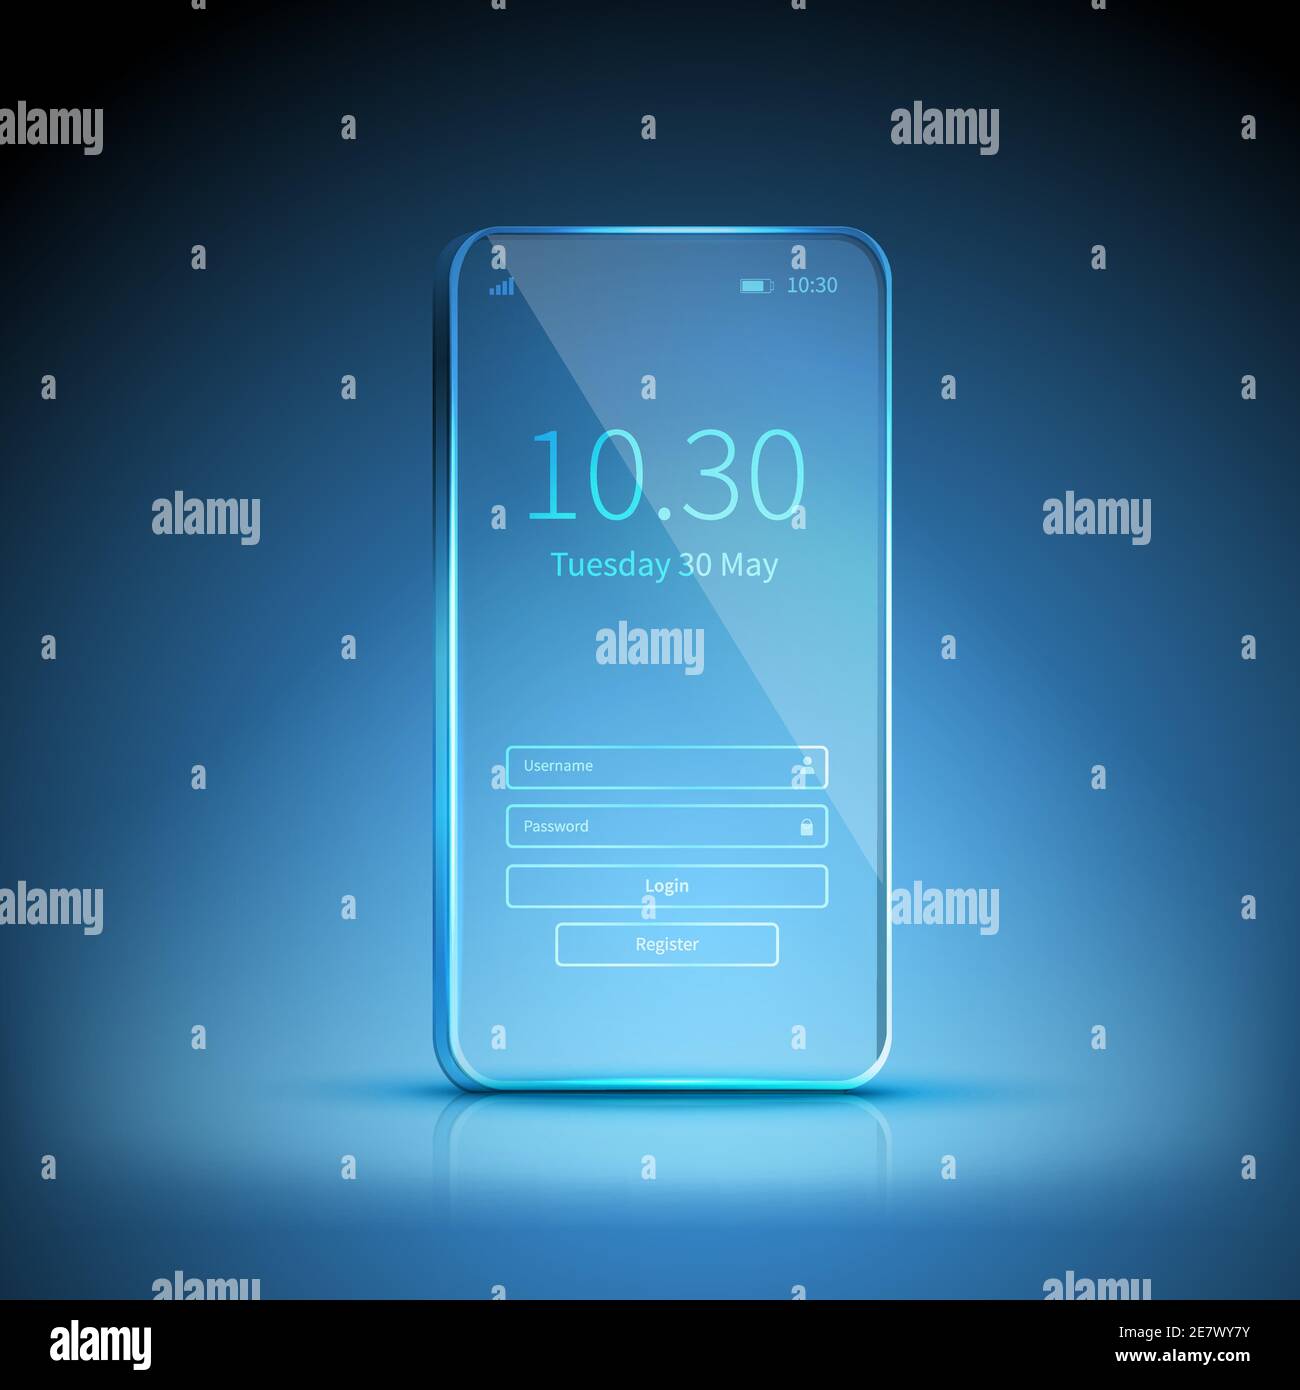 Blue transparent smartphone image swiched on and waiting for registration on blue background vector illustration Stock Vector